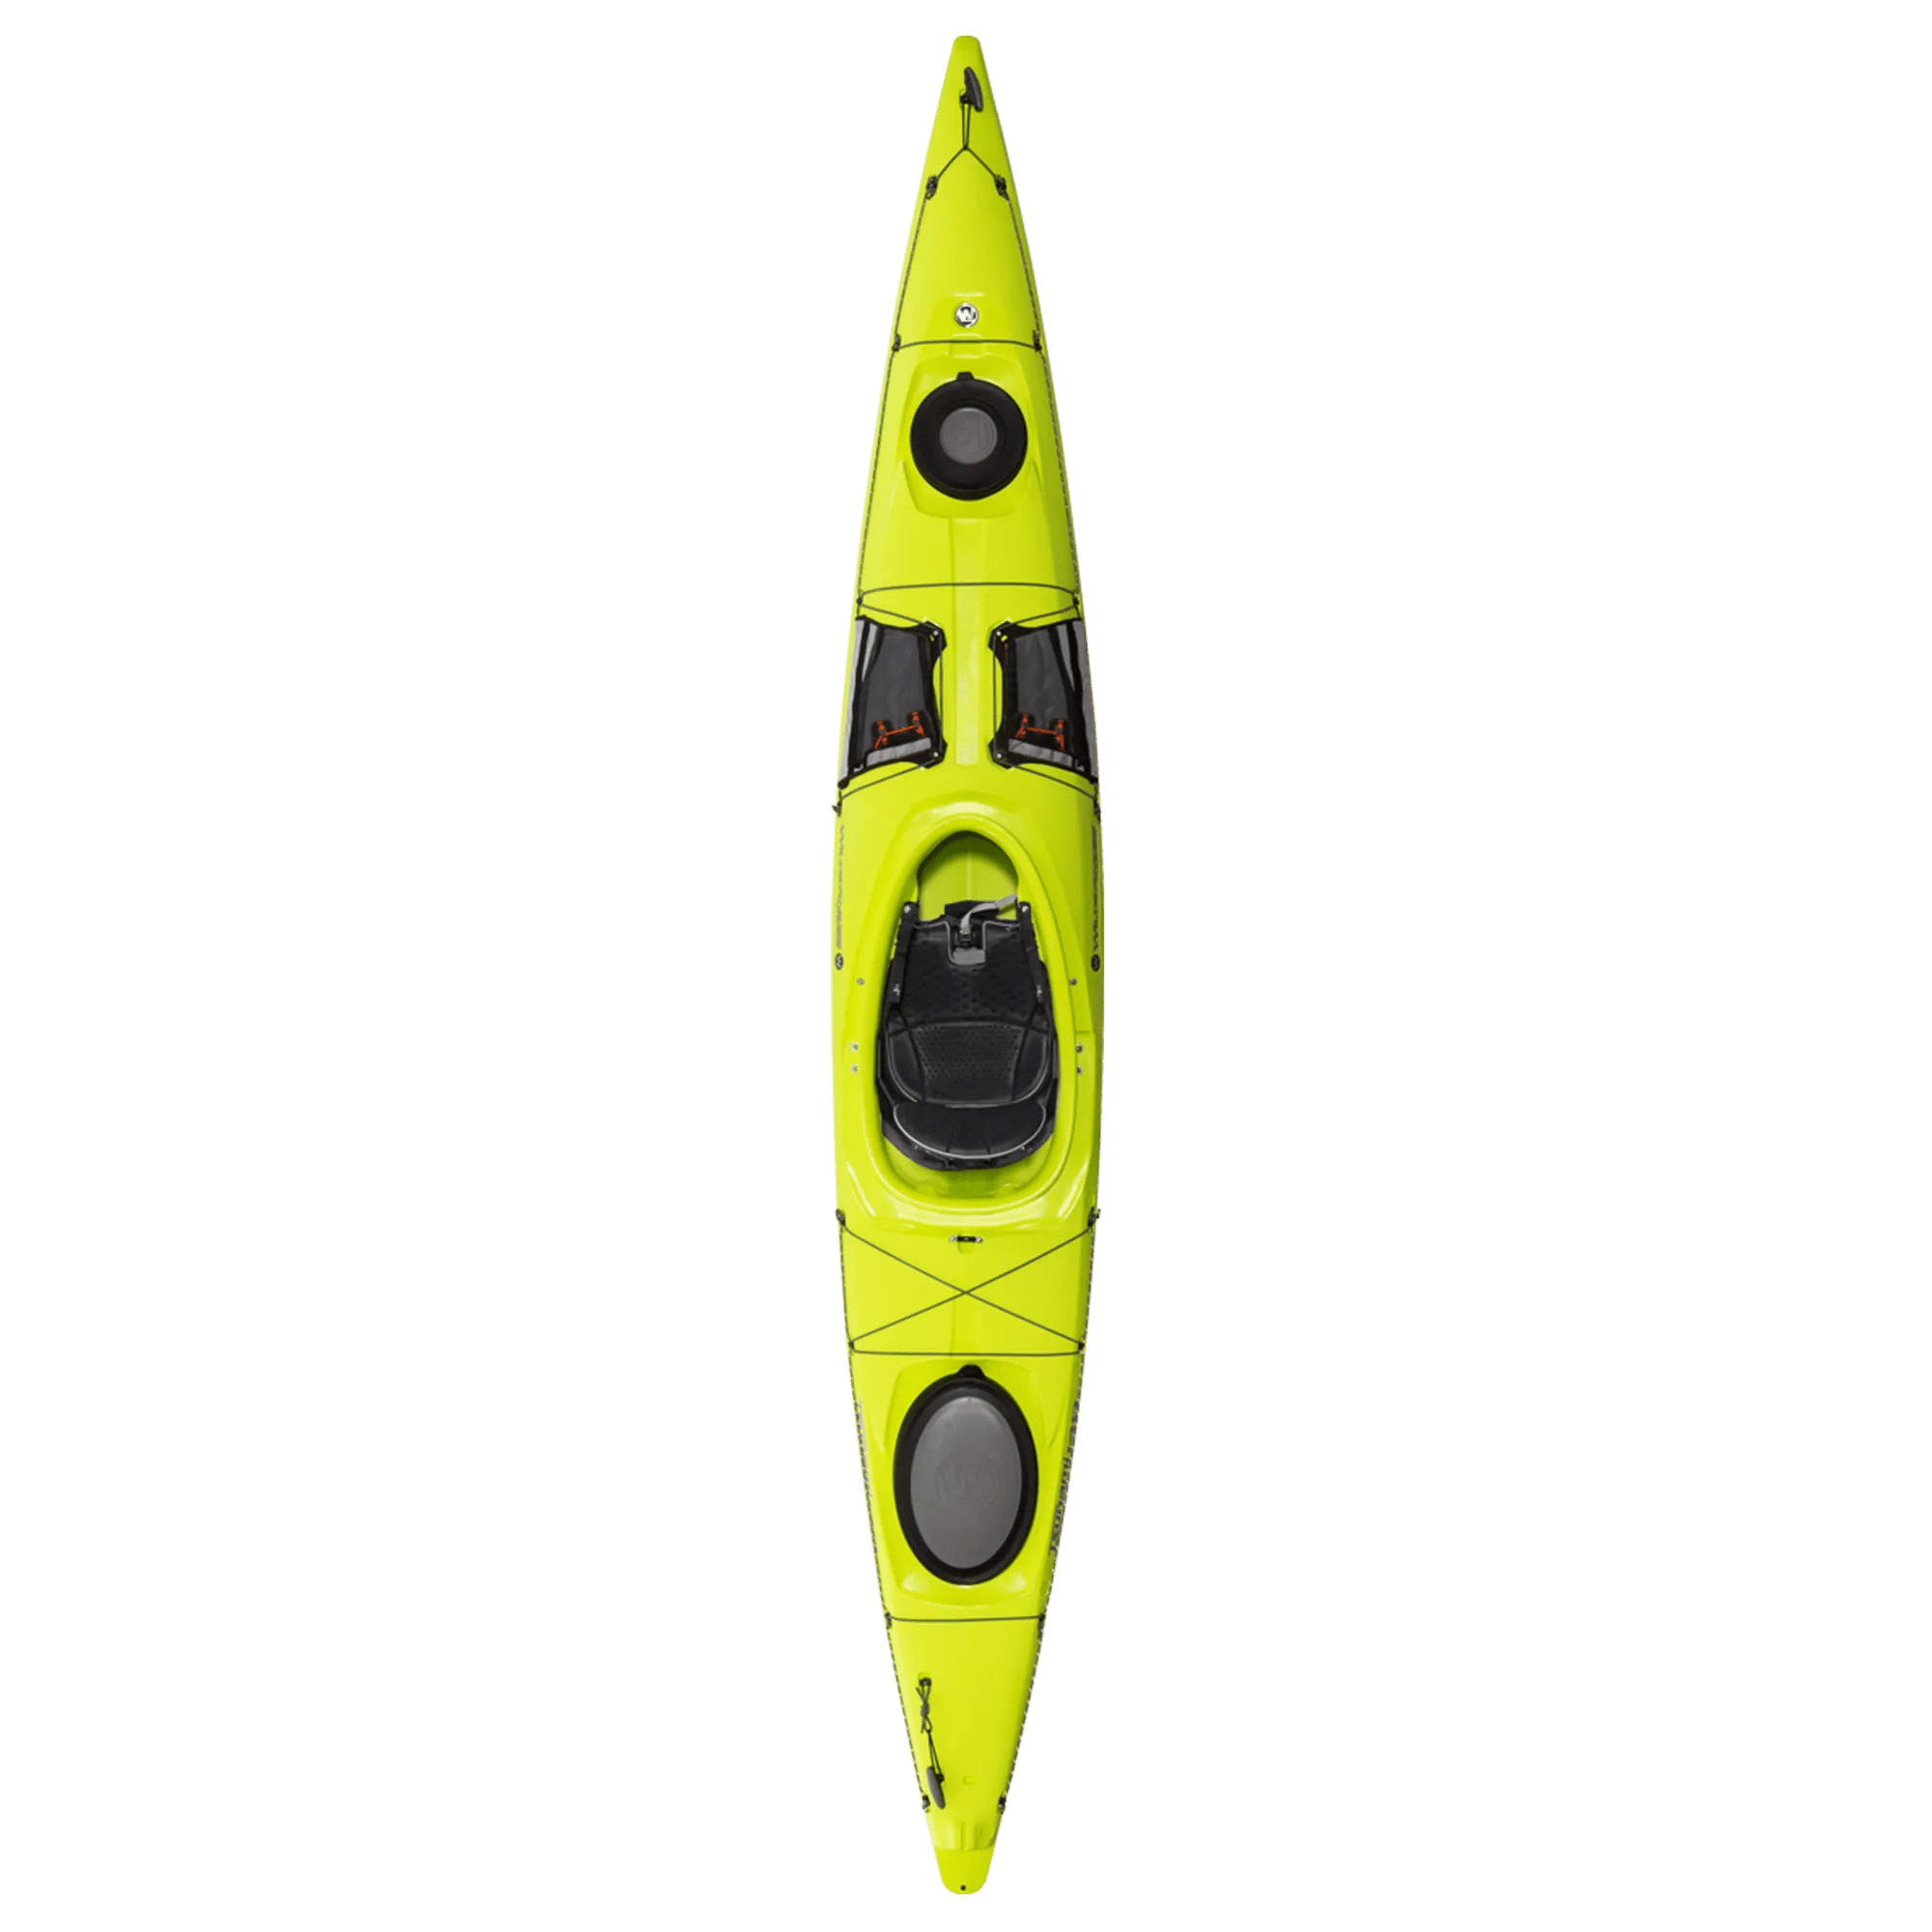 WILDERNESS SYSTEMS - Tsunami 140 Day Touring Kayak - Discontinued color/model - Yellow - 9720408180 - TOP 